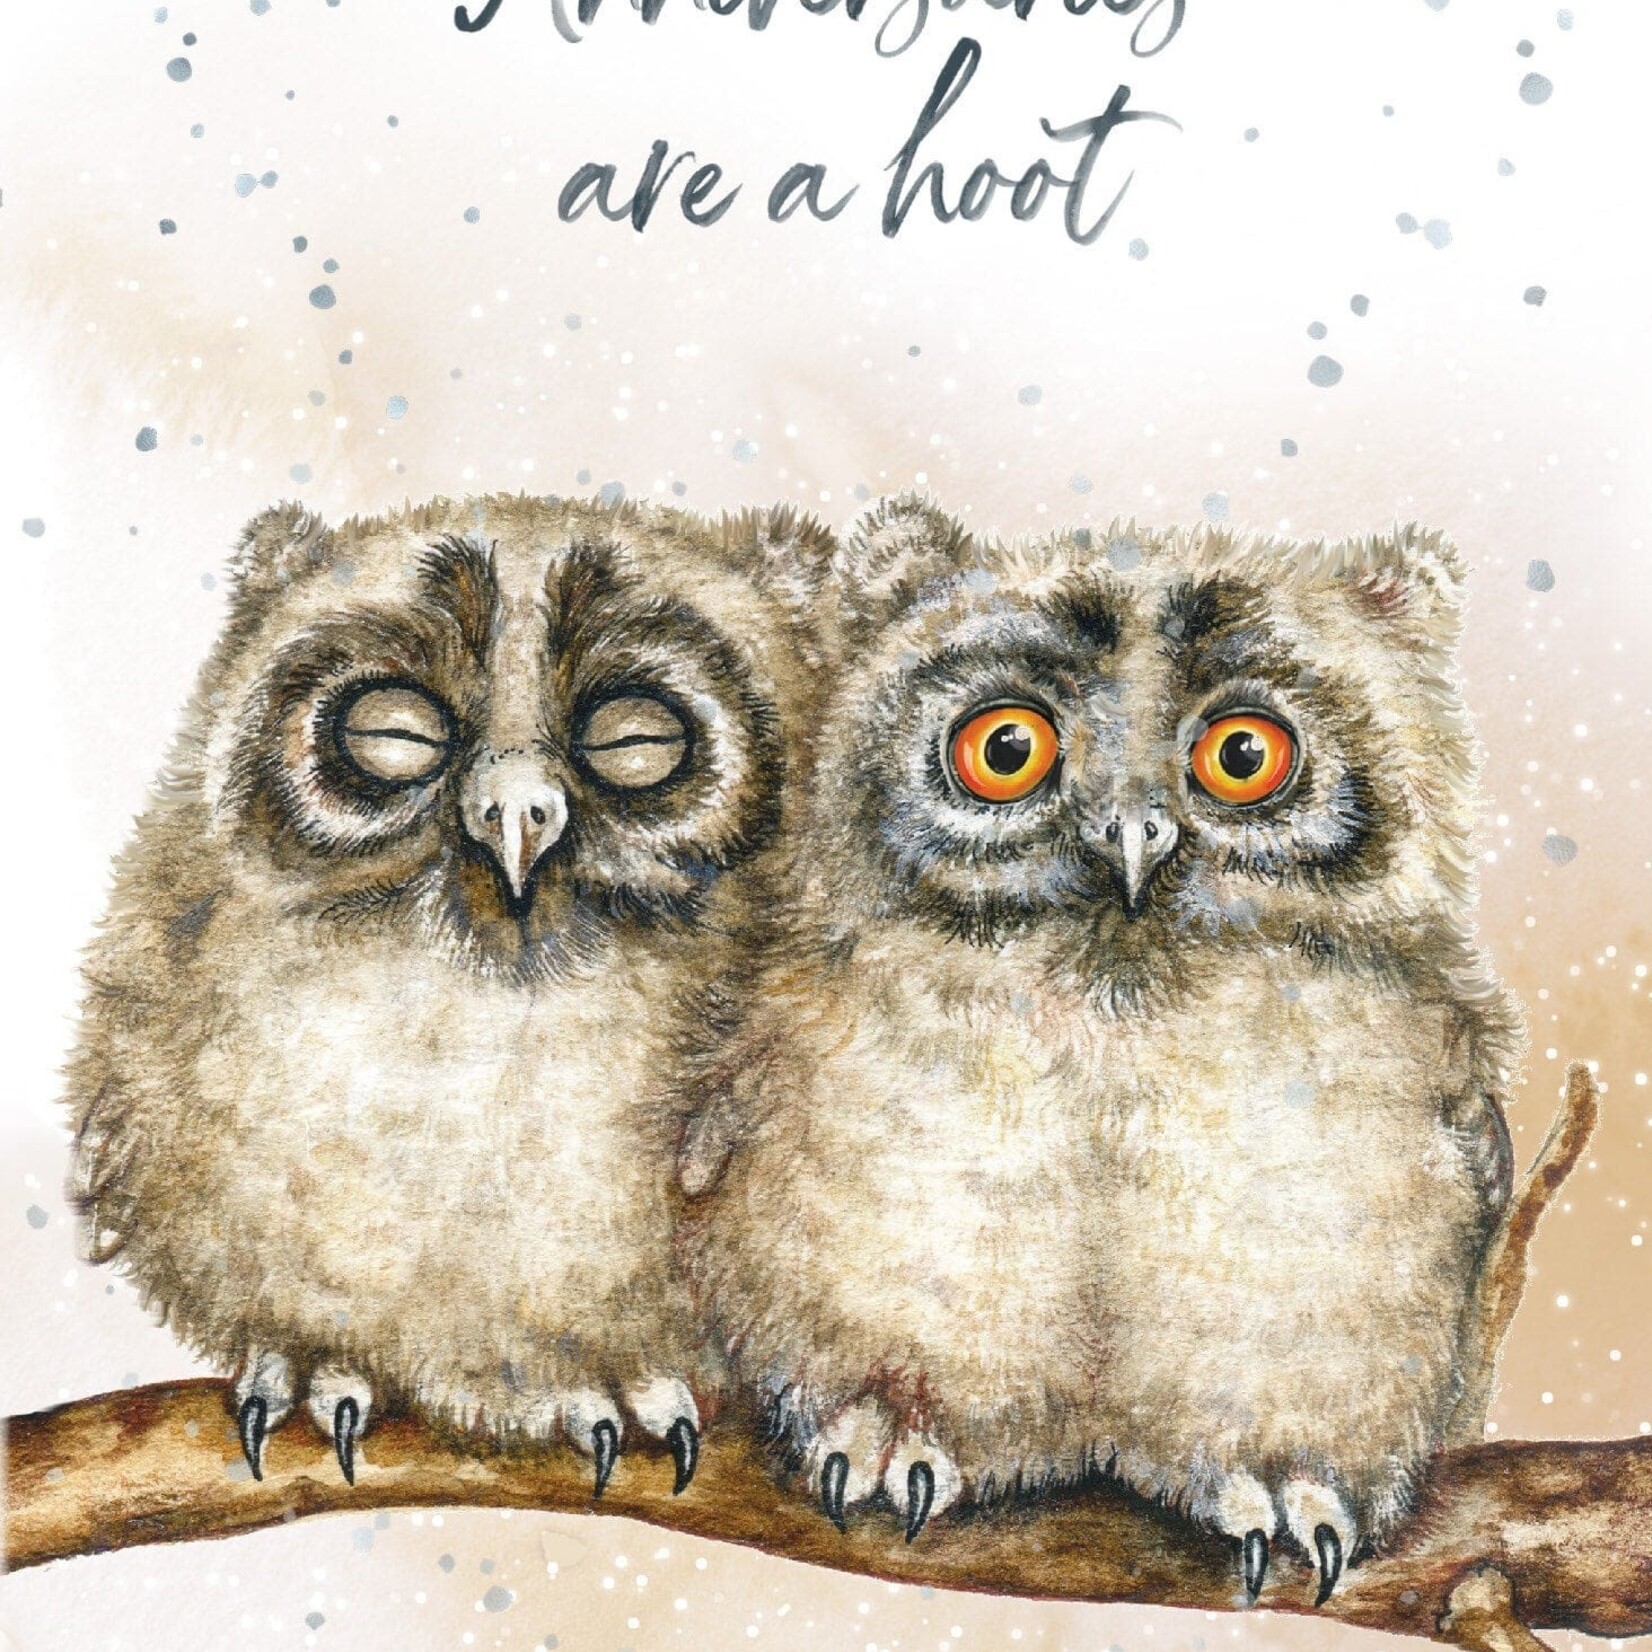 Anniversaries are a hoot - Greeting Card